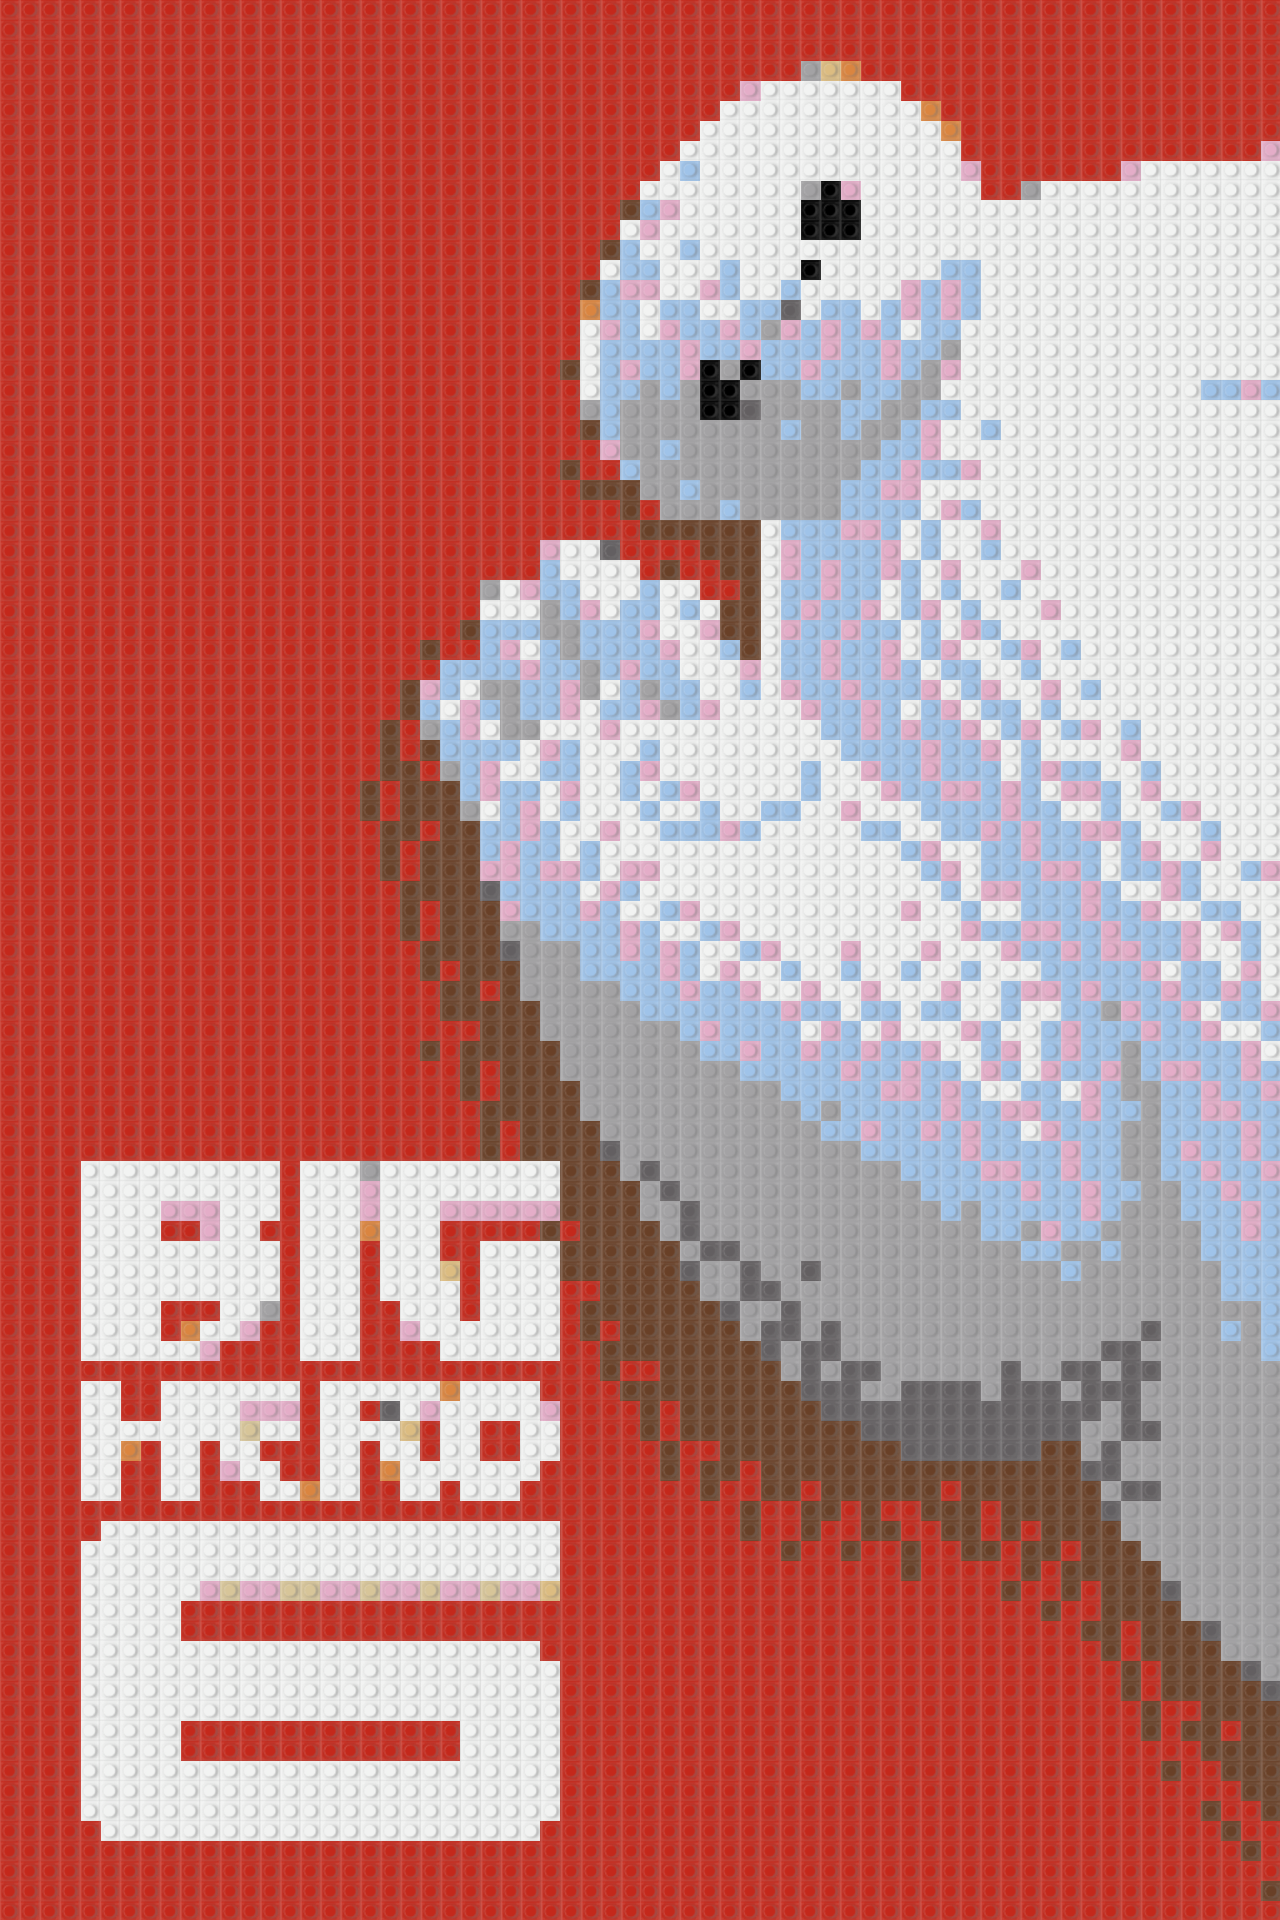 Load Image Into Gallery Viewer, Big Hero - Baymax Wallpaper Hd Android (1280x1920), Png Download